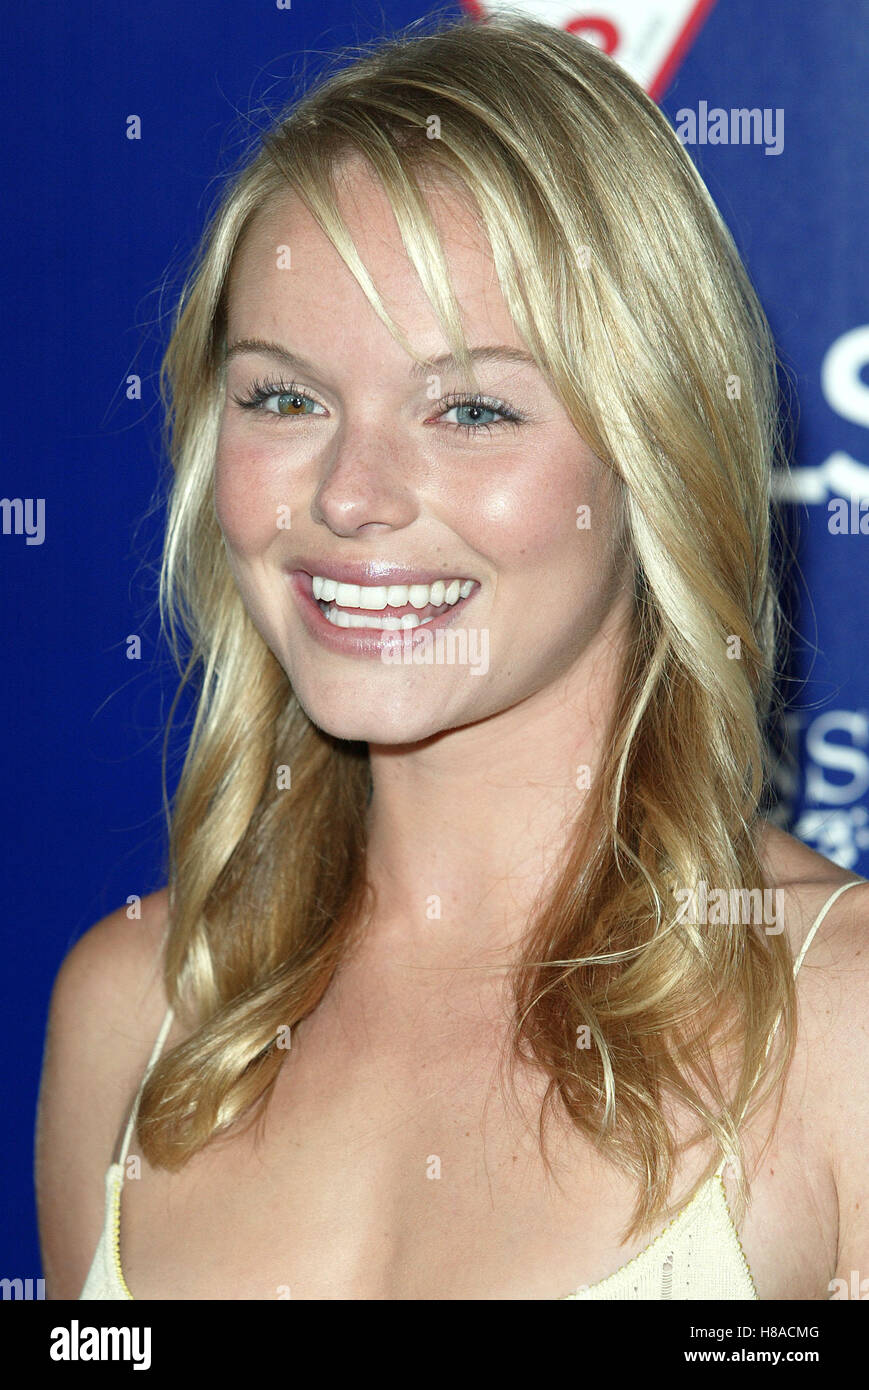 KATE BOSWORTH Wunderland PREMIERE LOS ANGELES GRAUMAN CHINESE THEATRE HOLLYWOOD USA 24. September 2003 Stockfoto